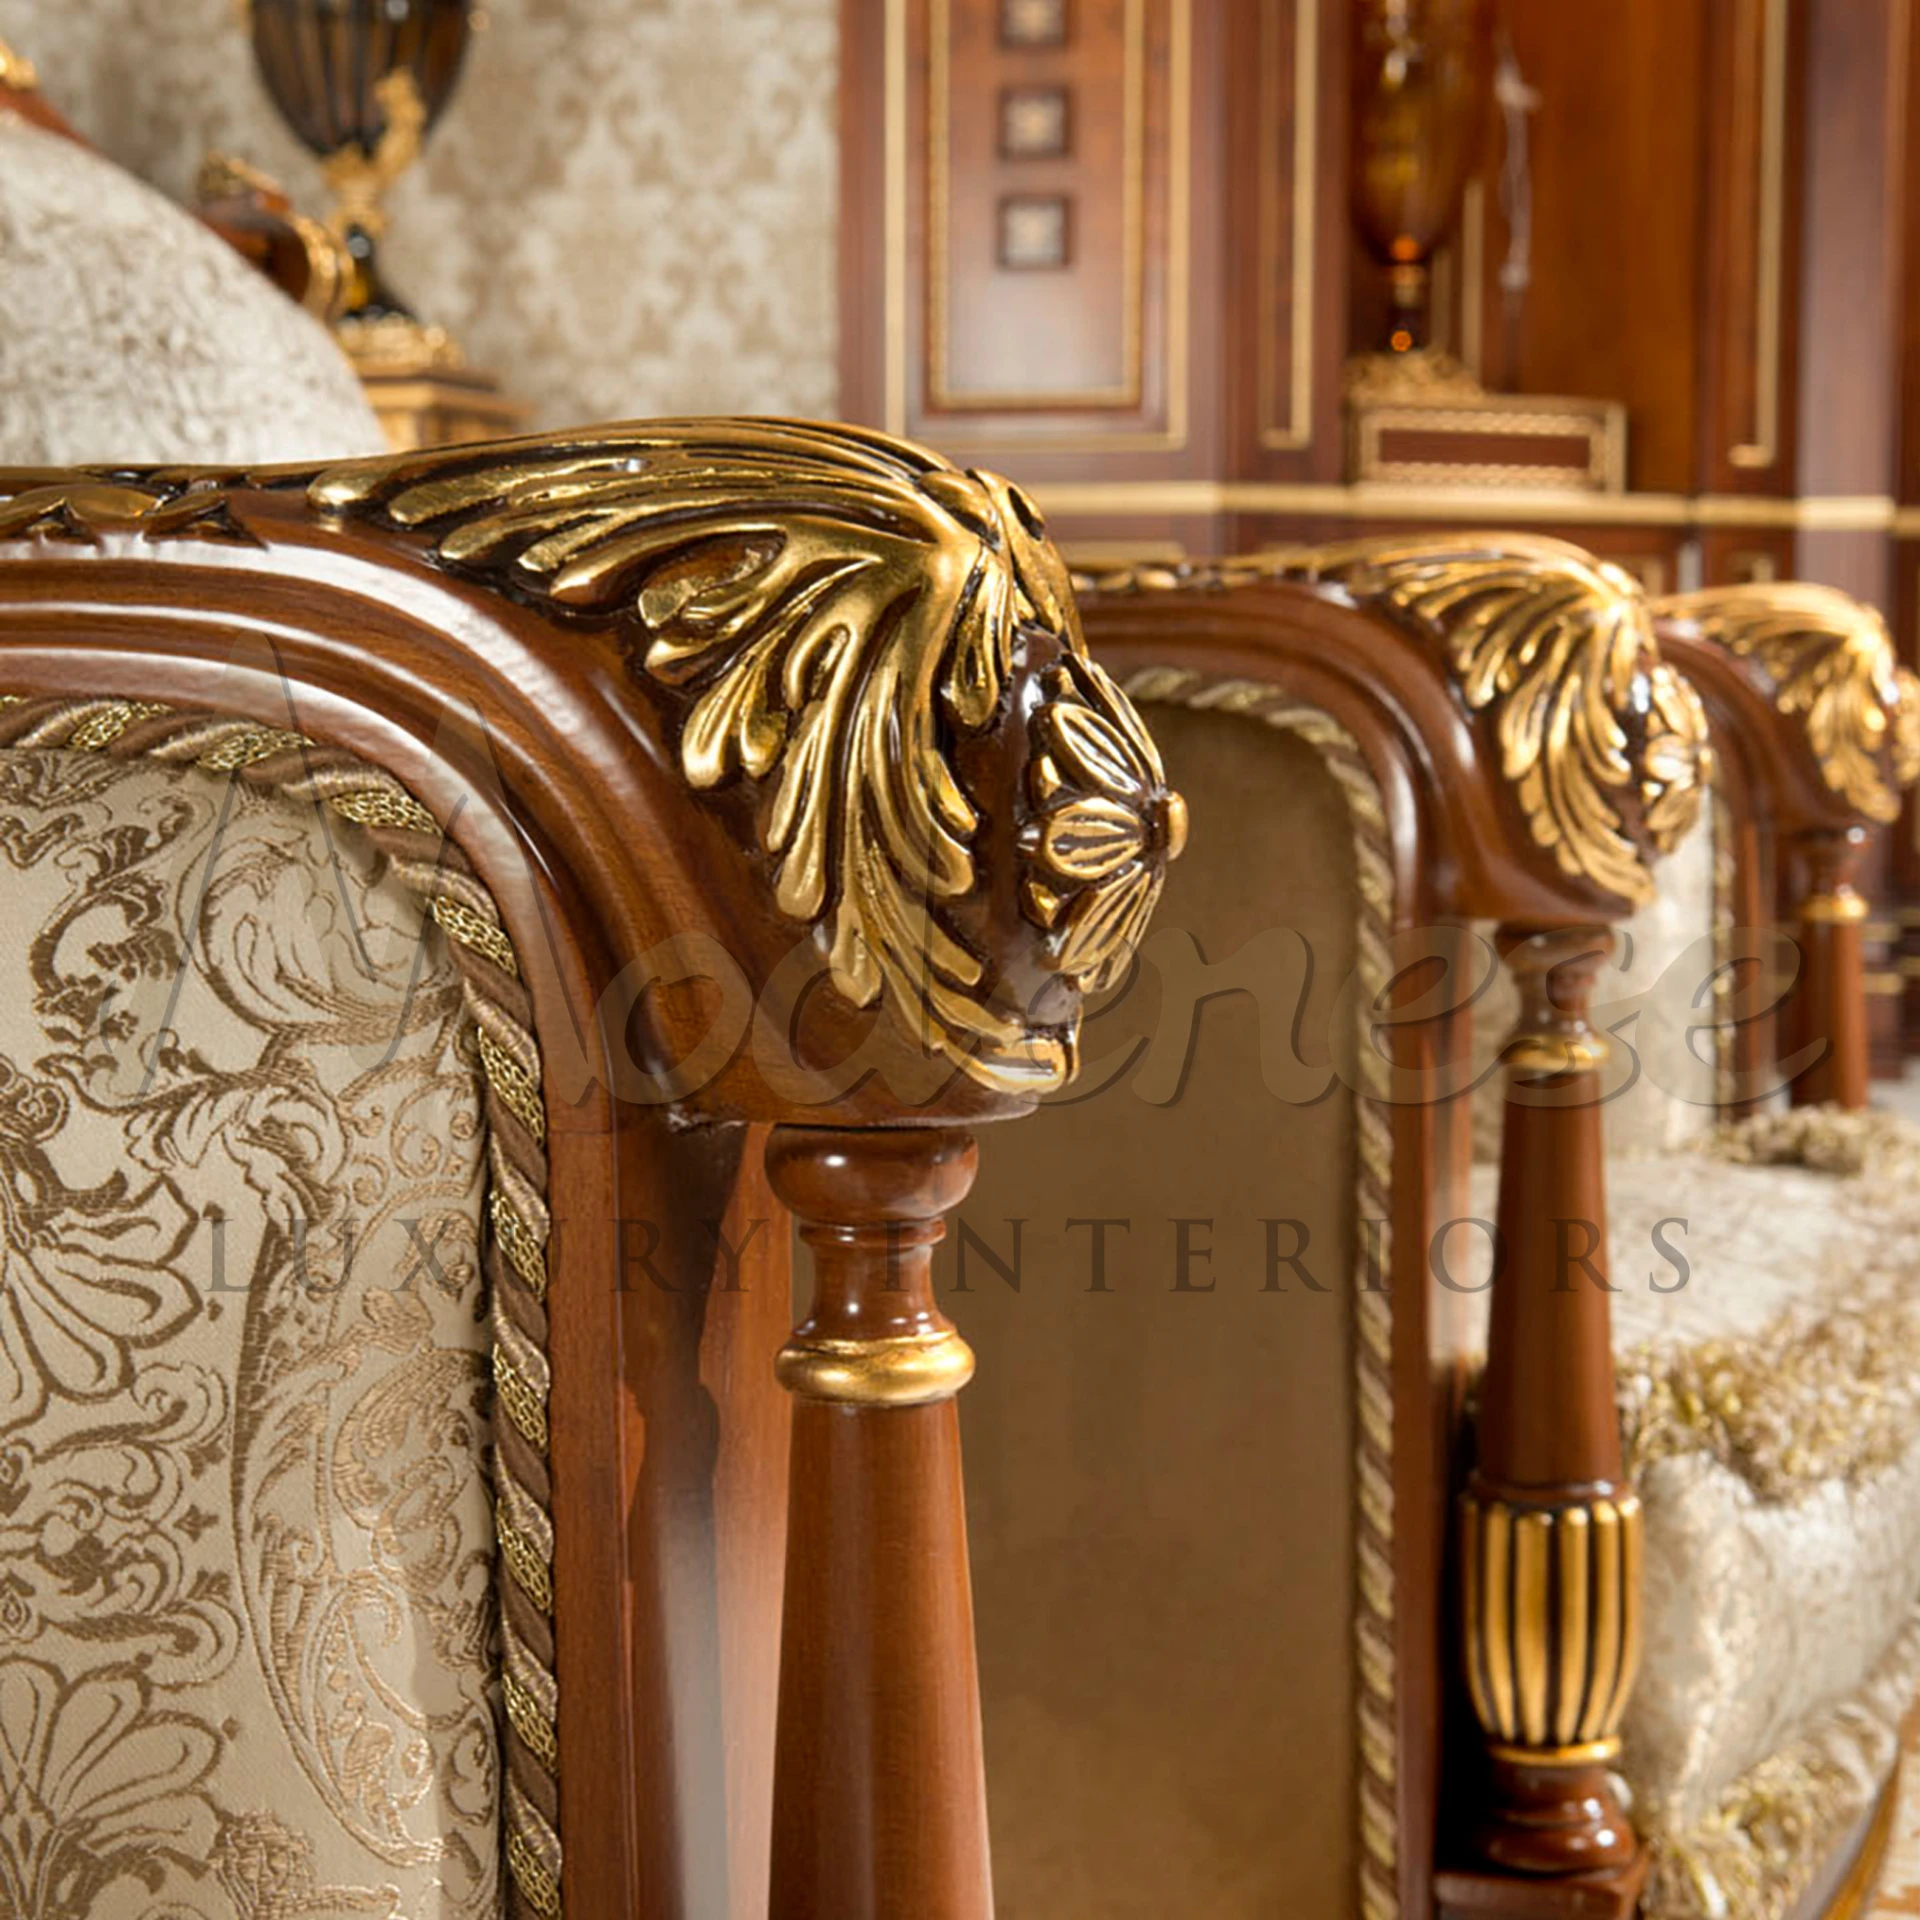 Majestic Handcarved Imperial Sofa: Opulent Design for Grand Living Spaces